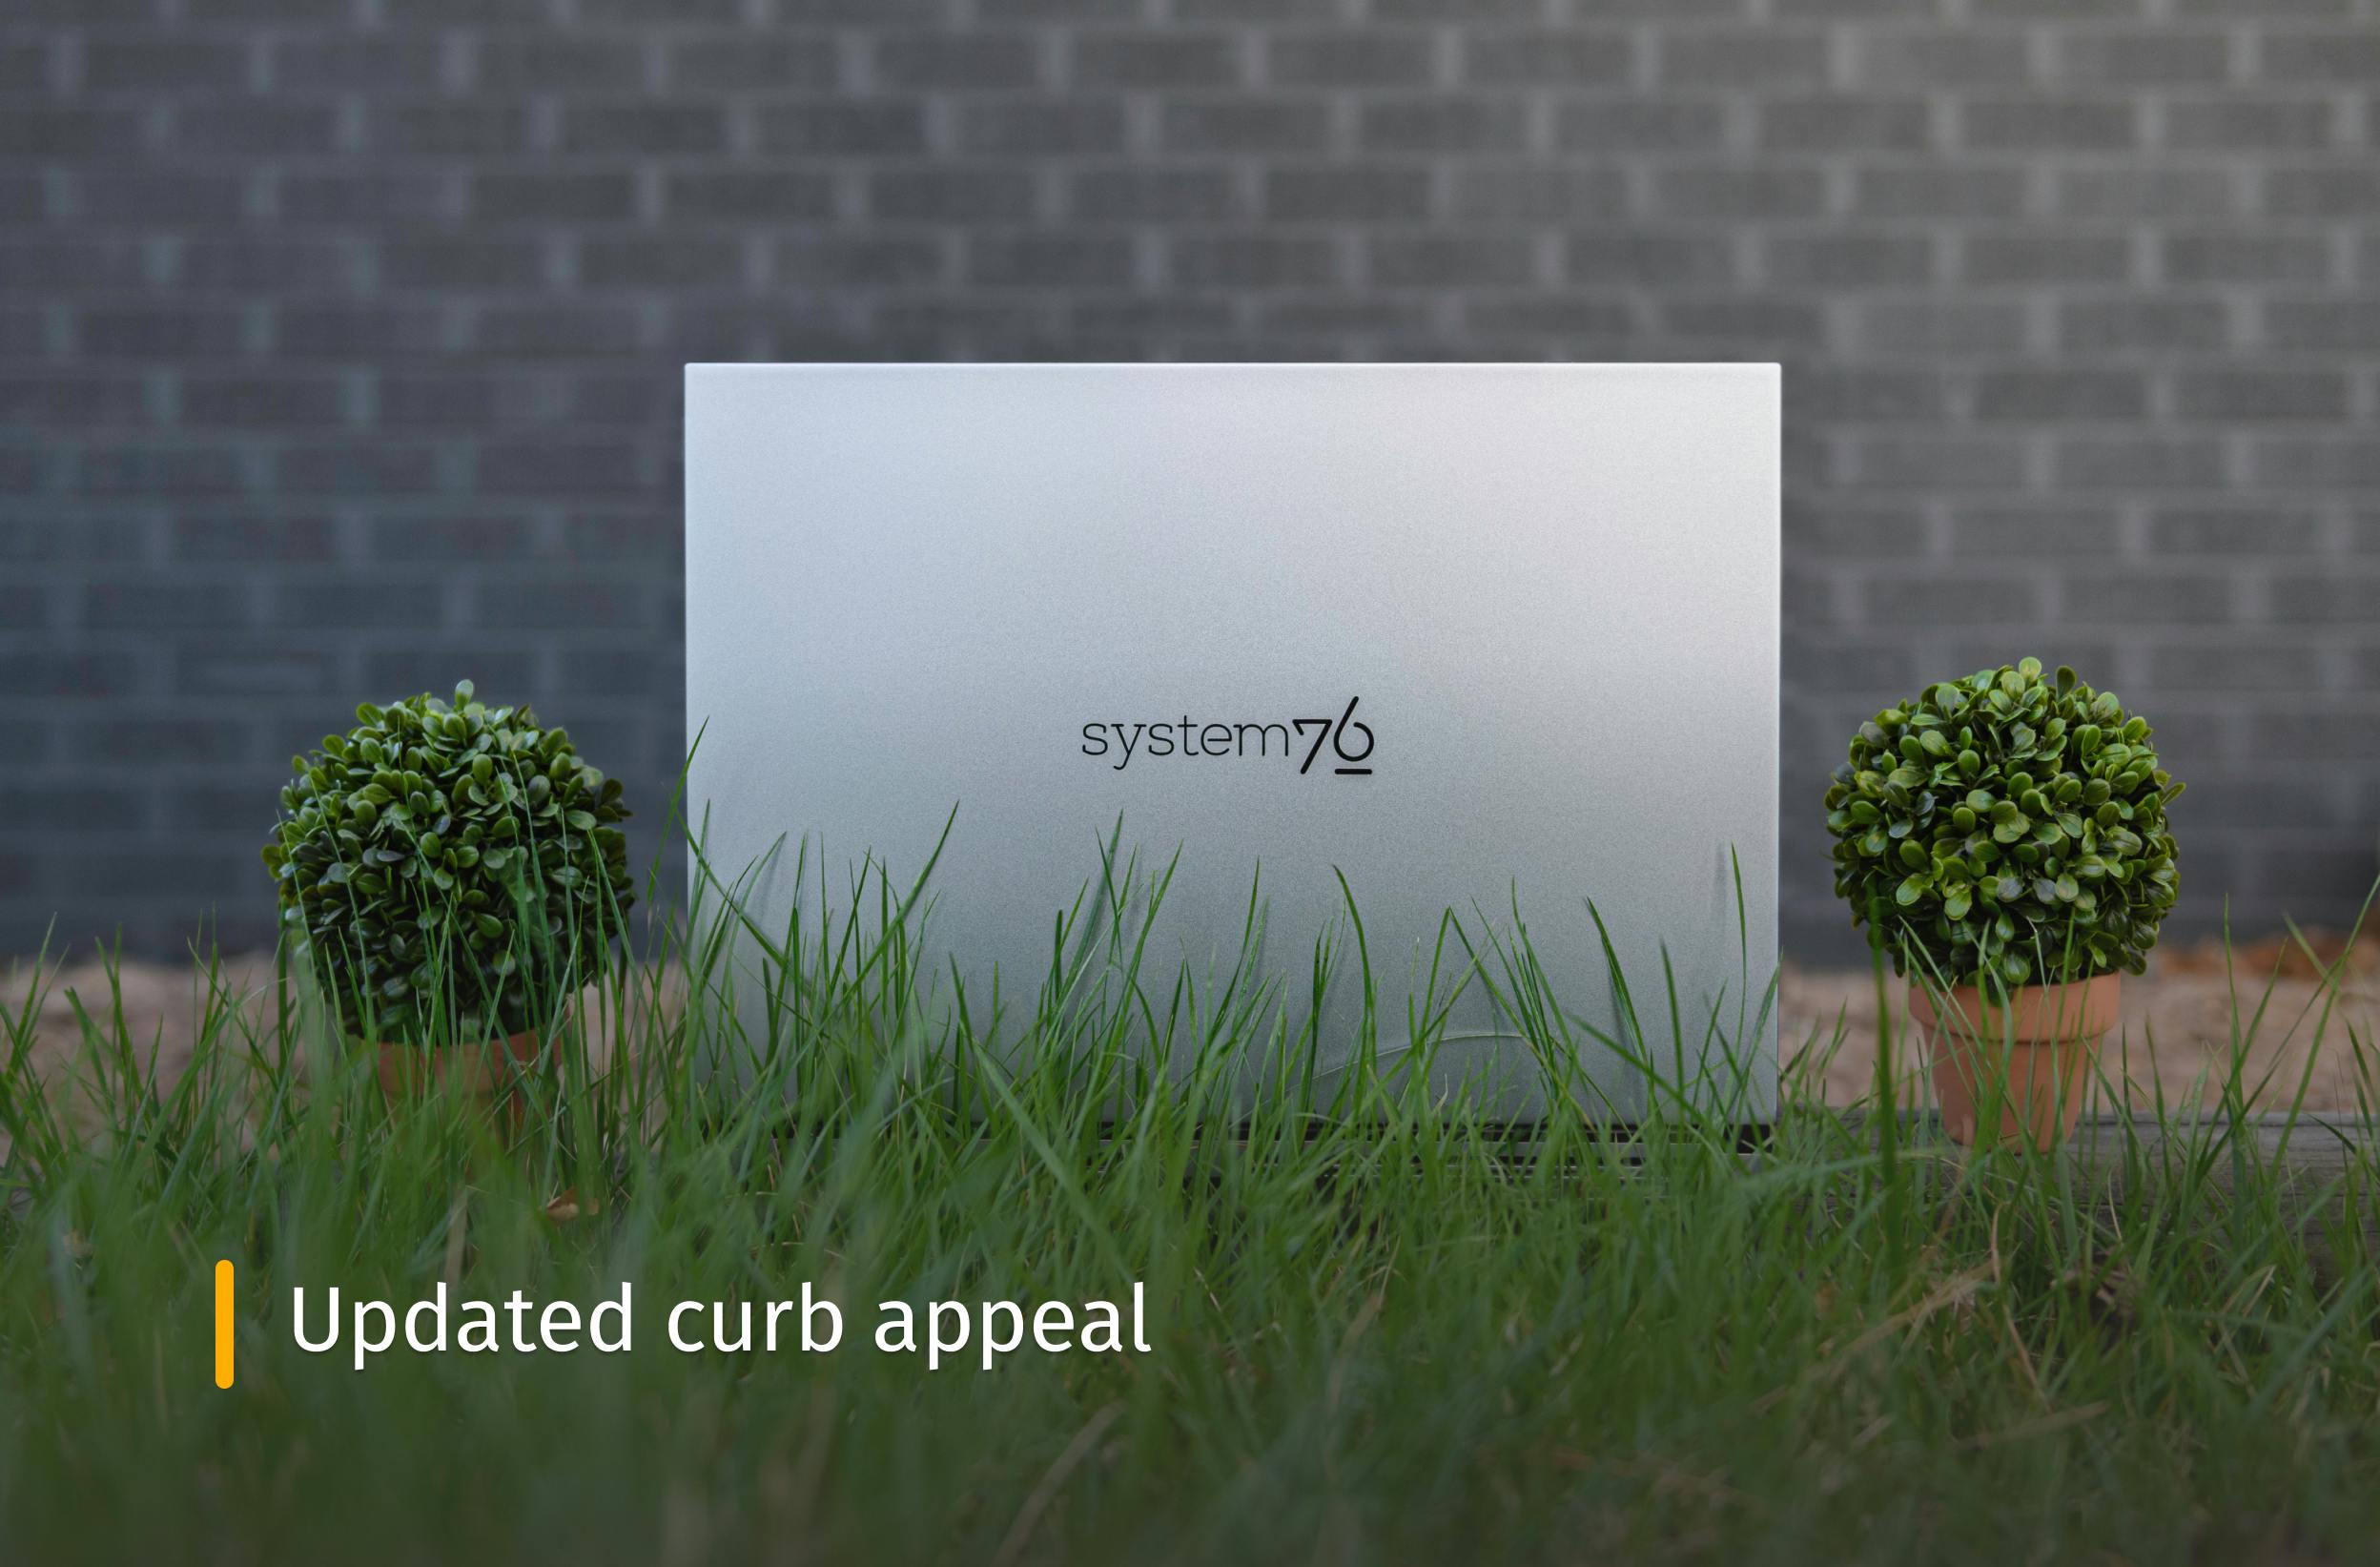 Darter Pro with hedges and a lawn in front of it with text that reads "Updated curb appeal"